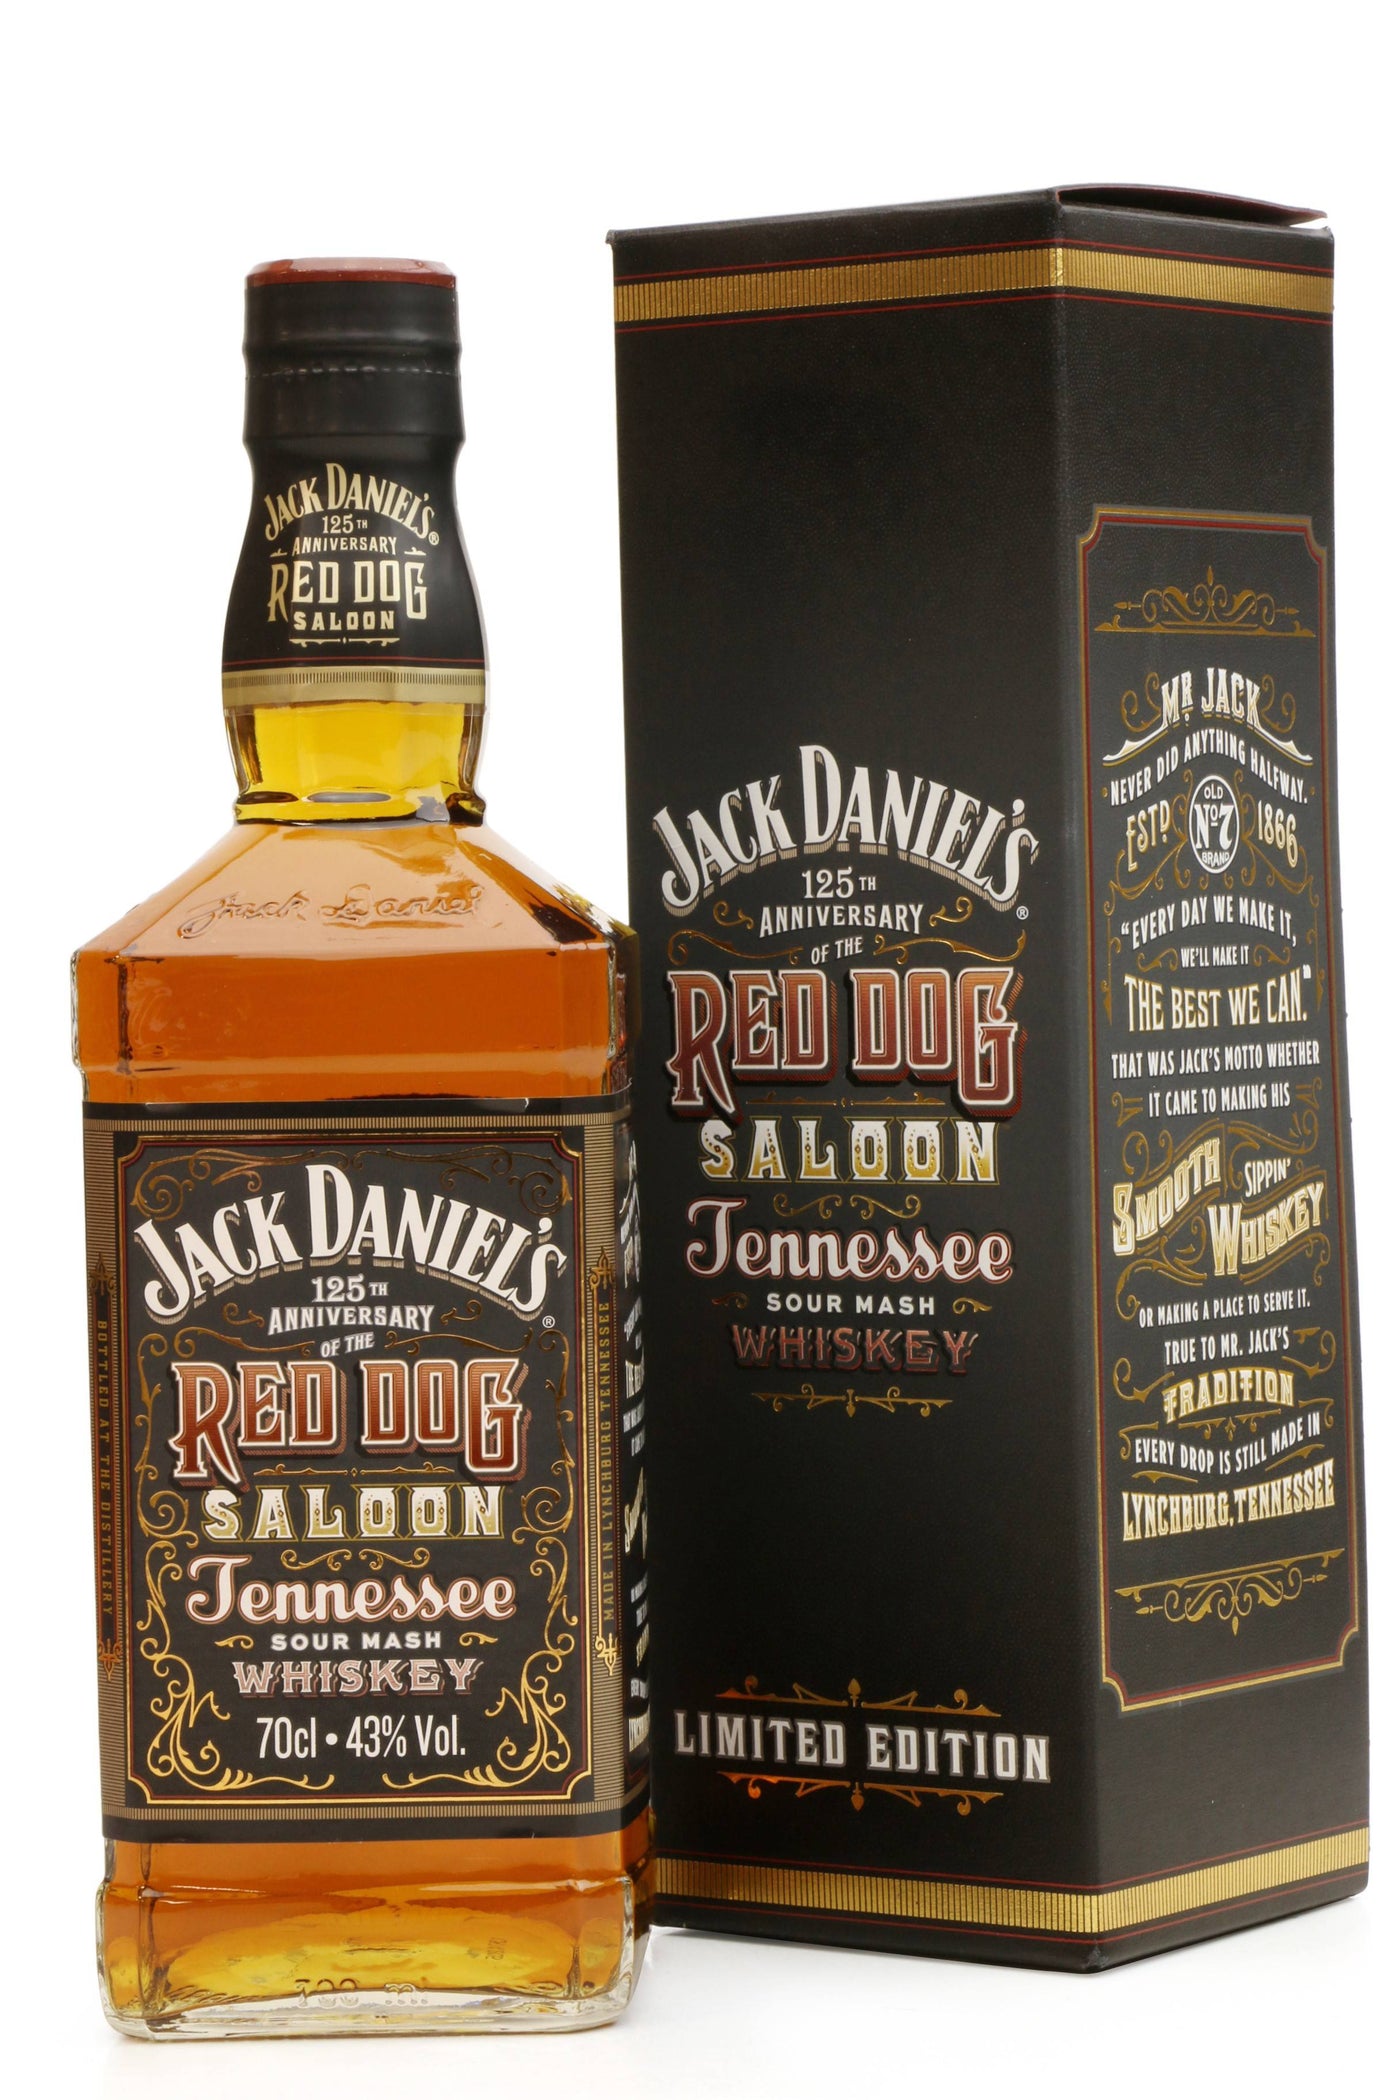 Resonate dart Forbedre BUY] Jack Daniel's 125th Anniversary of the Red Dog Saloon Box Whiskey |  700ML at CaskCartel.com